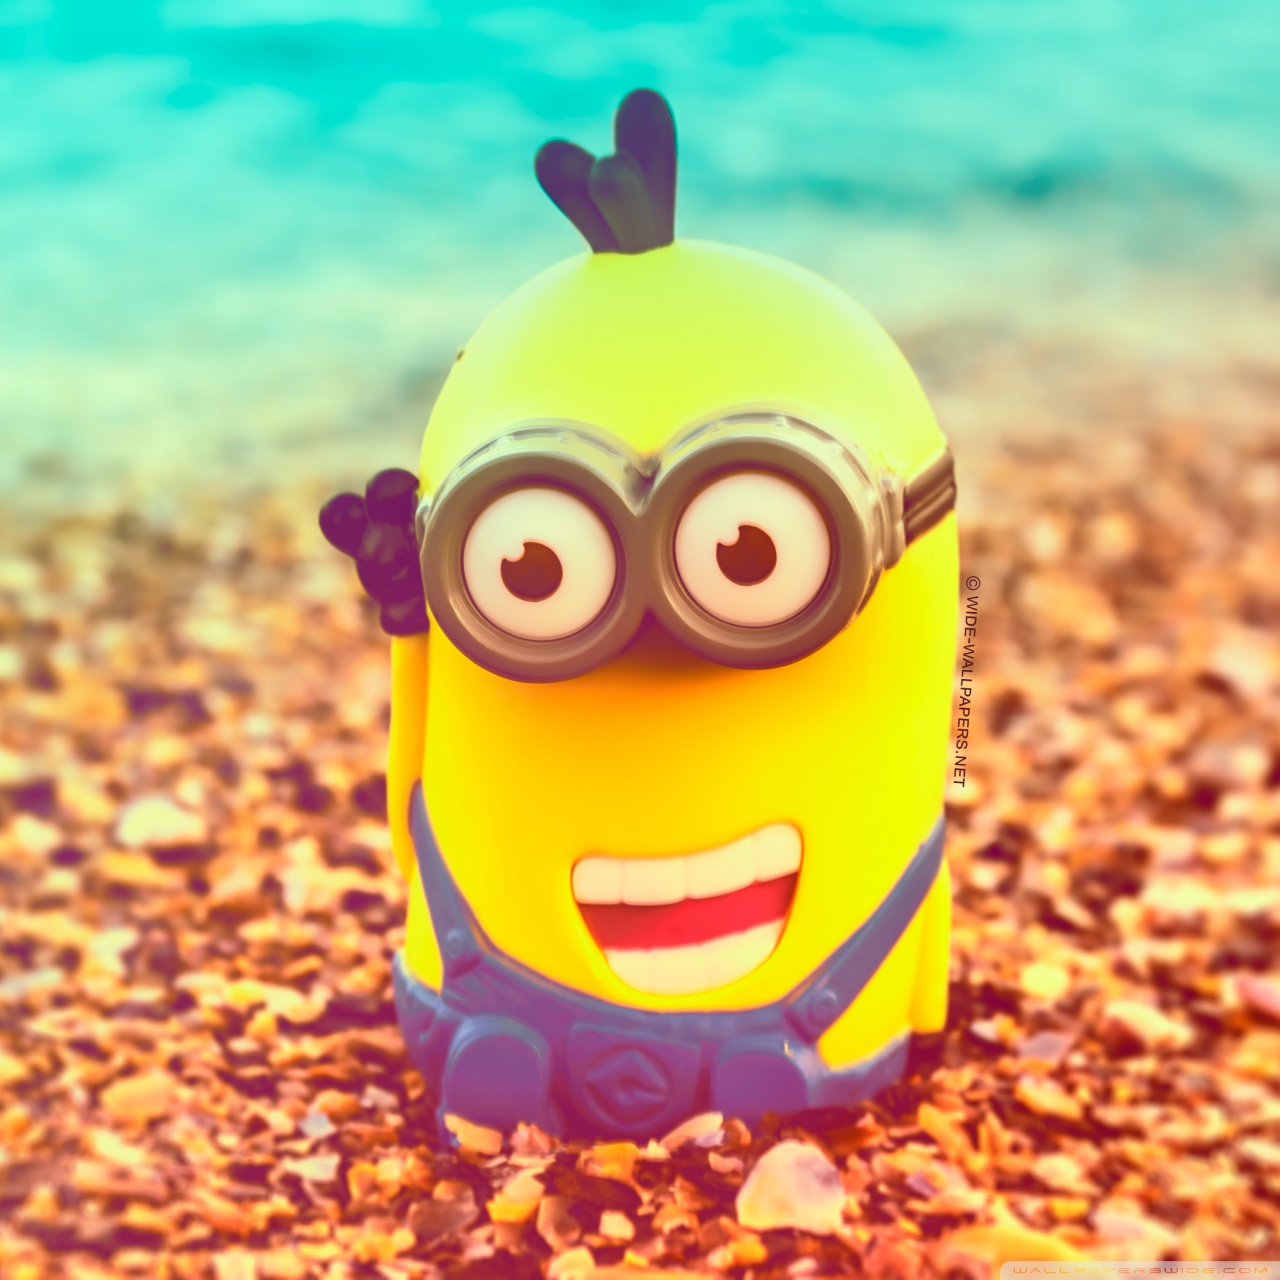 Minions Wallpaper For Android Tablet | loopele.com